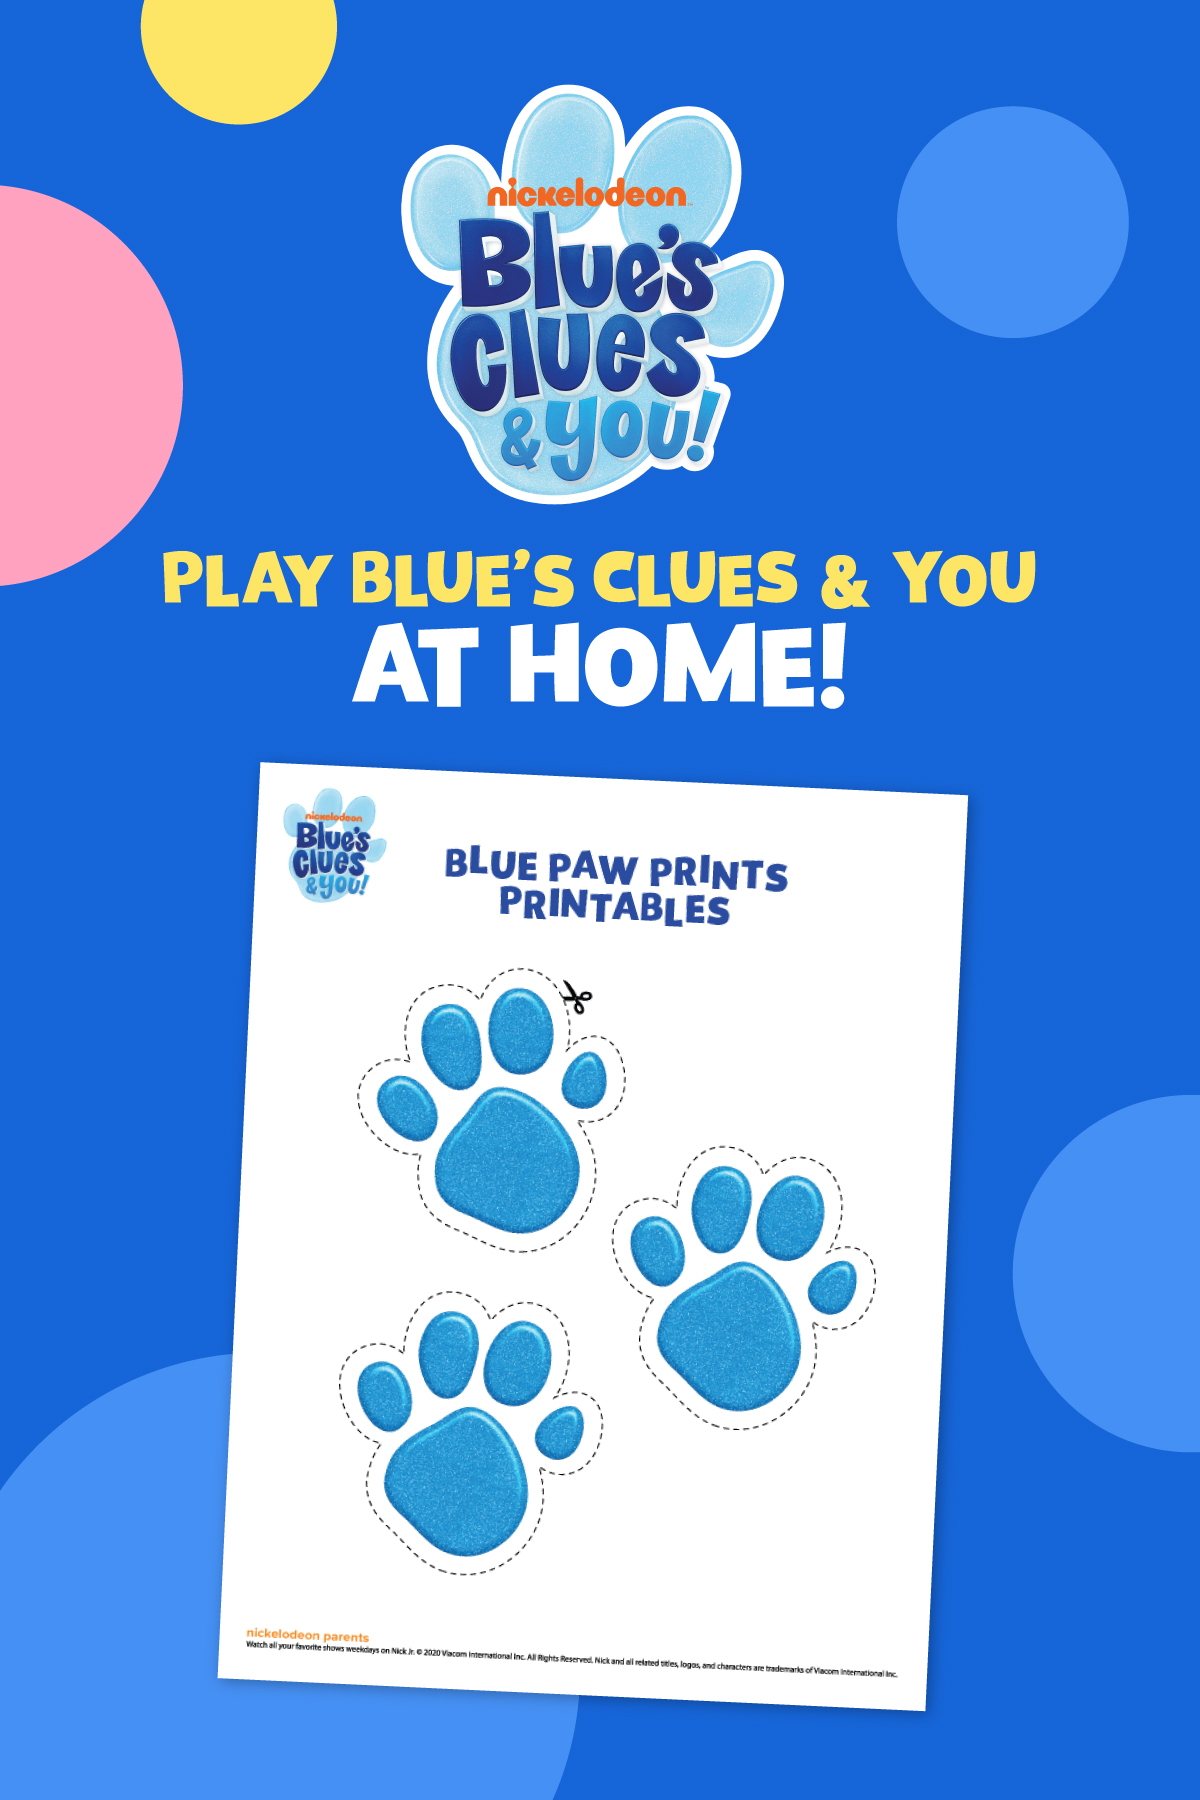 Play Blue's Clues at Home! Nickelodeon Parents